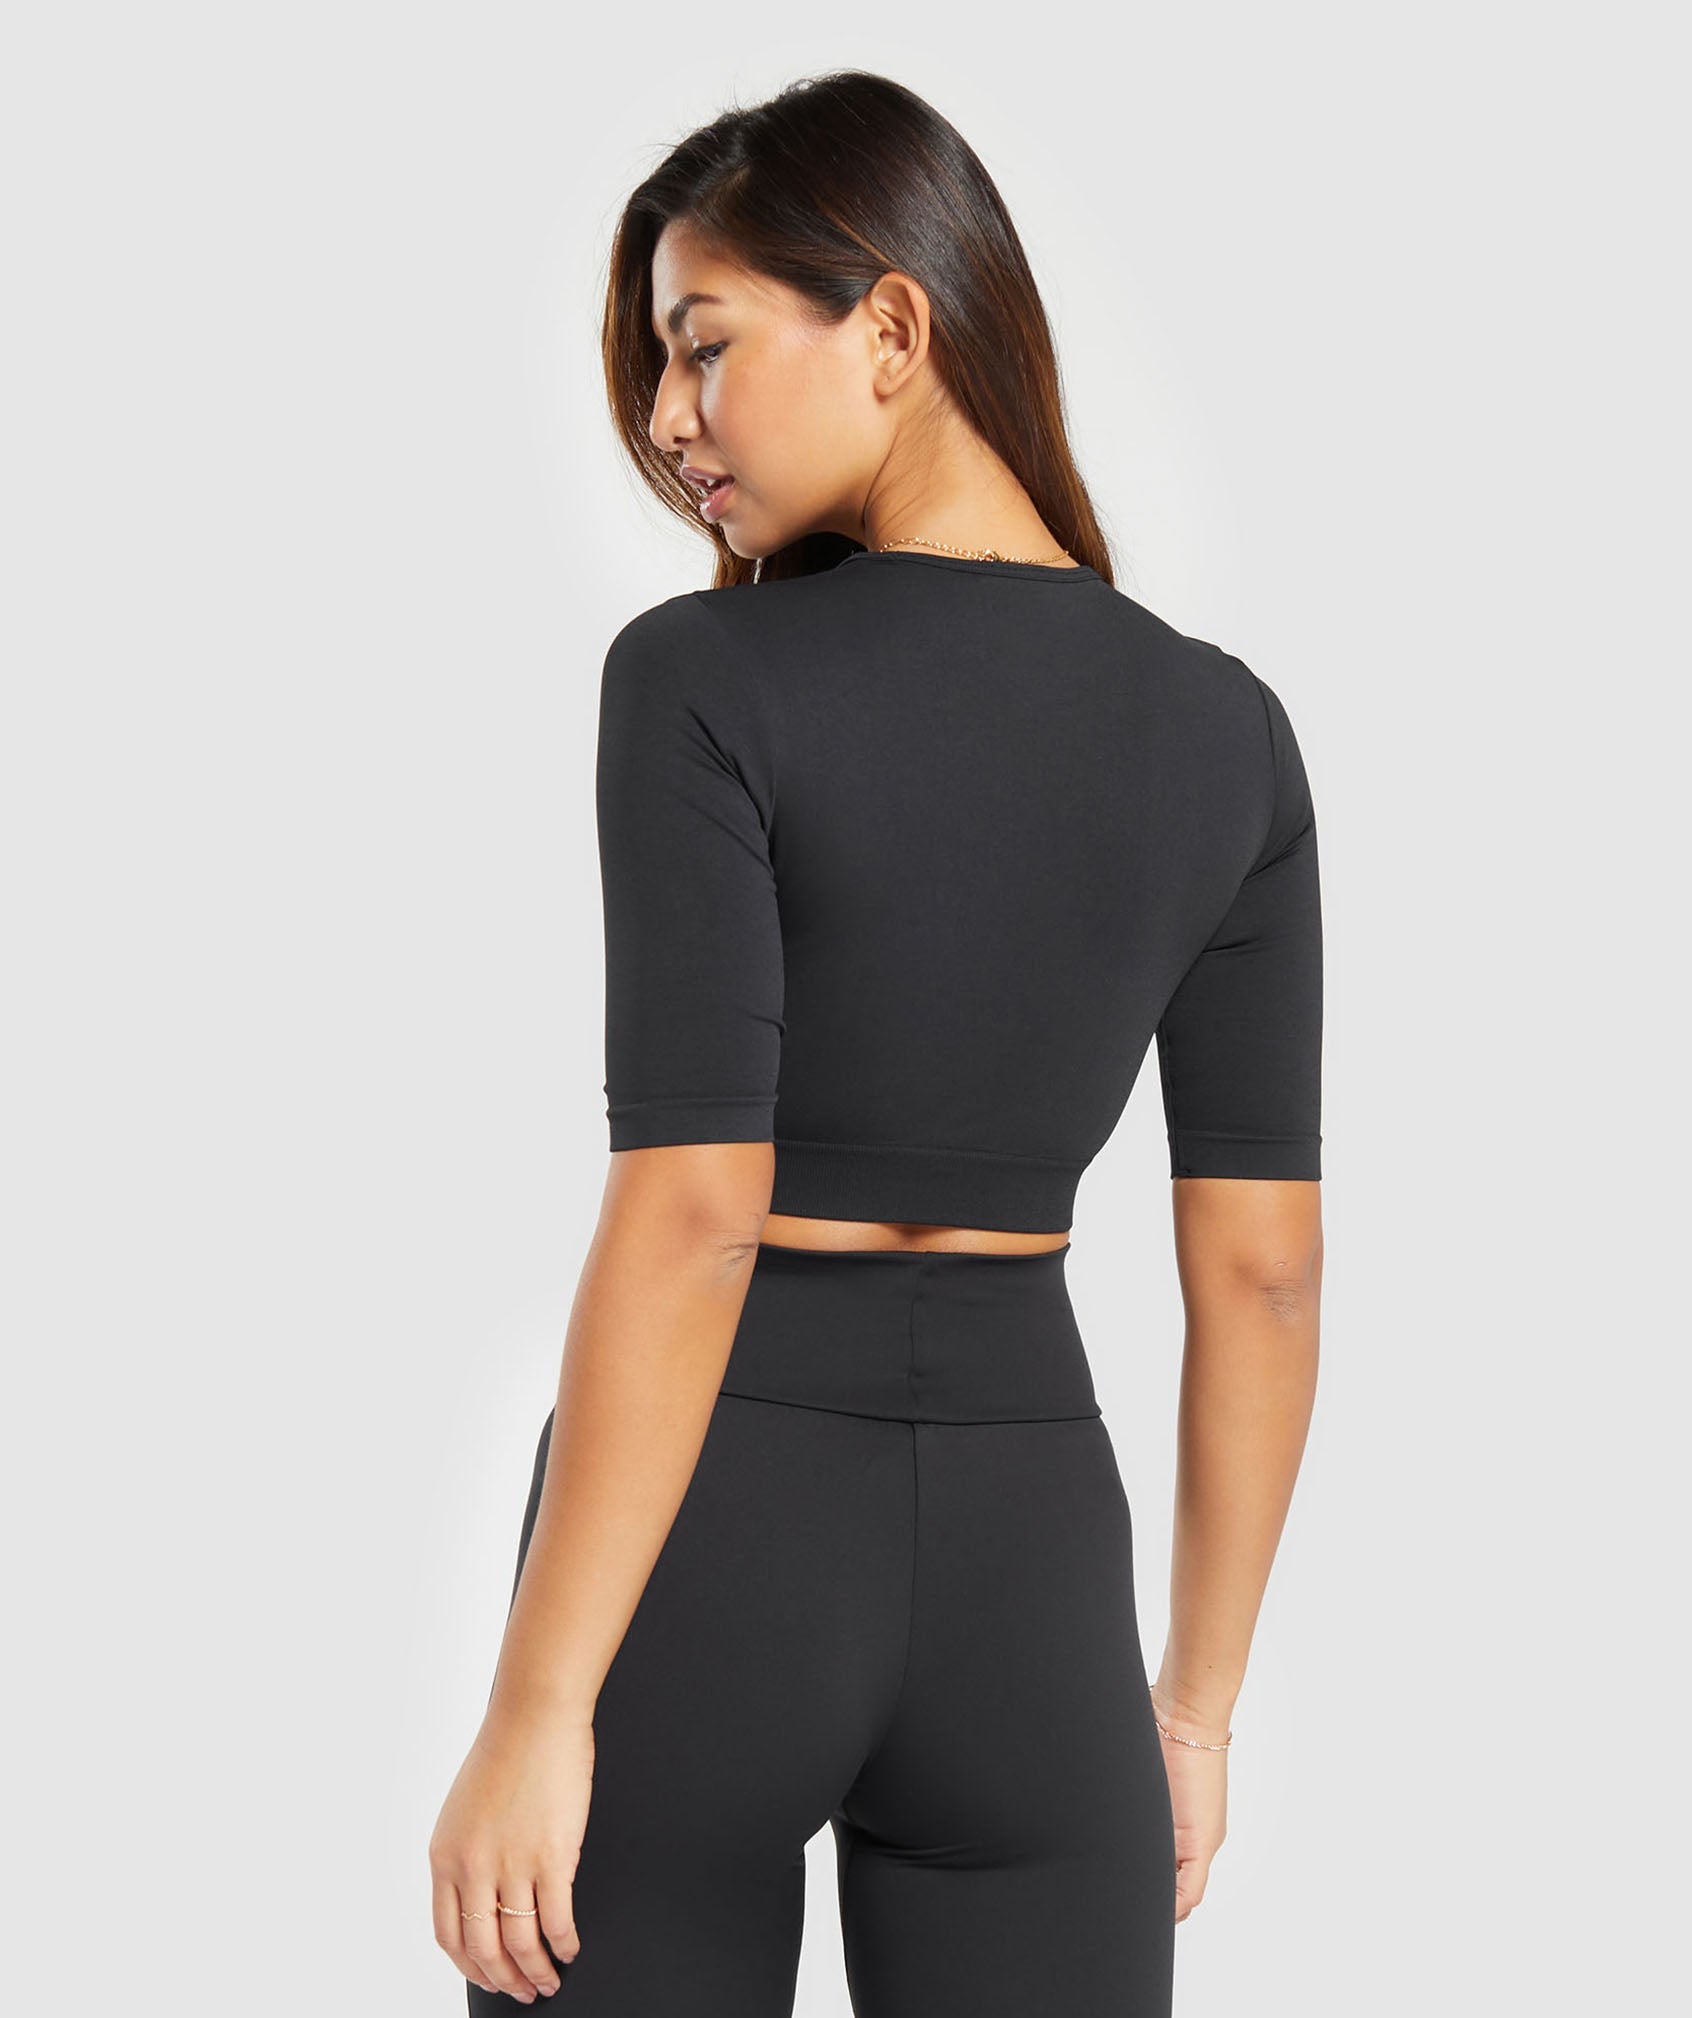 Everyday Seamless Crop Top in Black - view 2